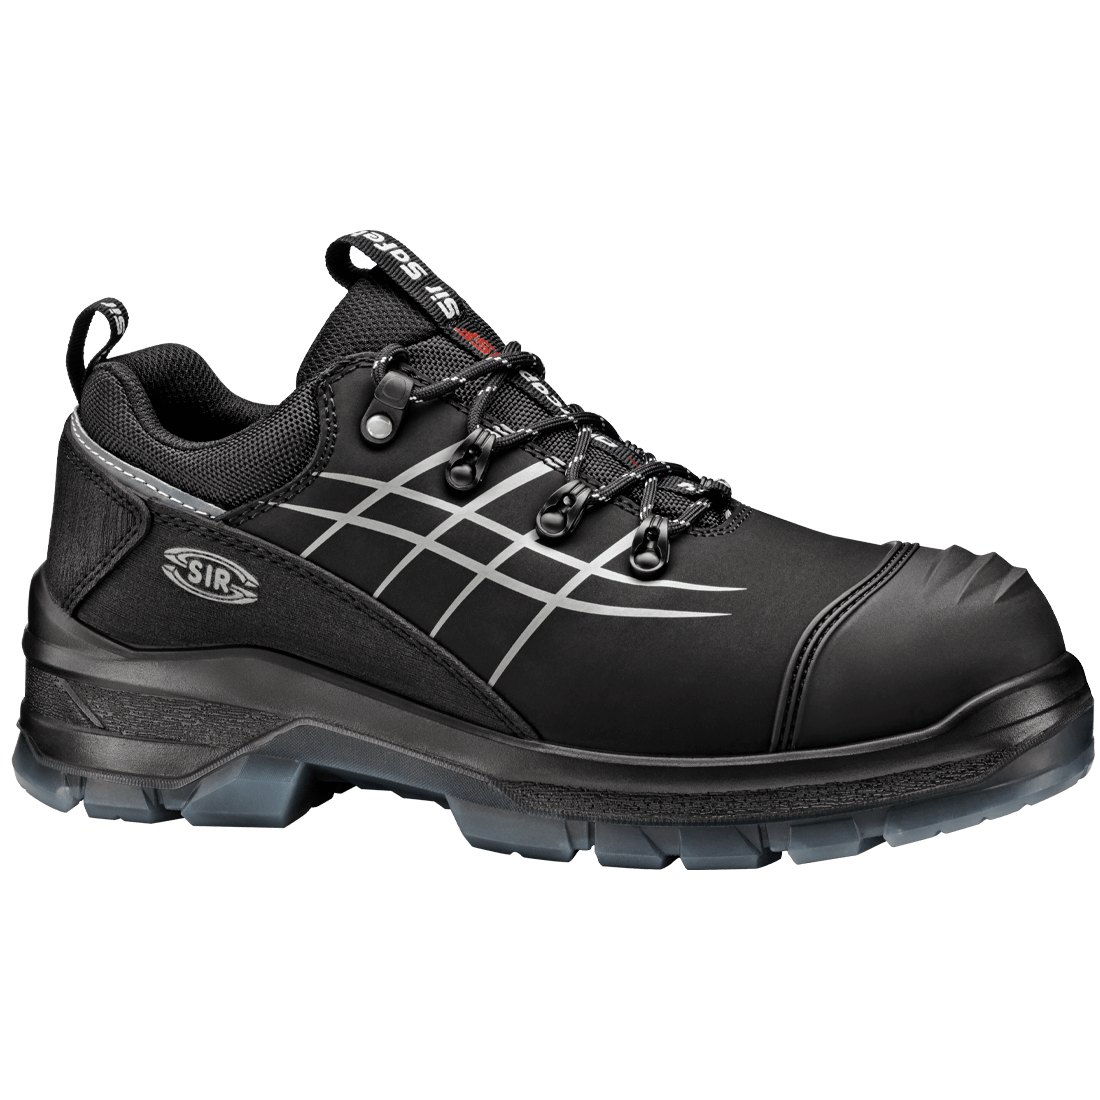 Sir | OVERCAP NEW SHOE System BSF Safety REX